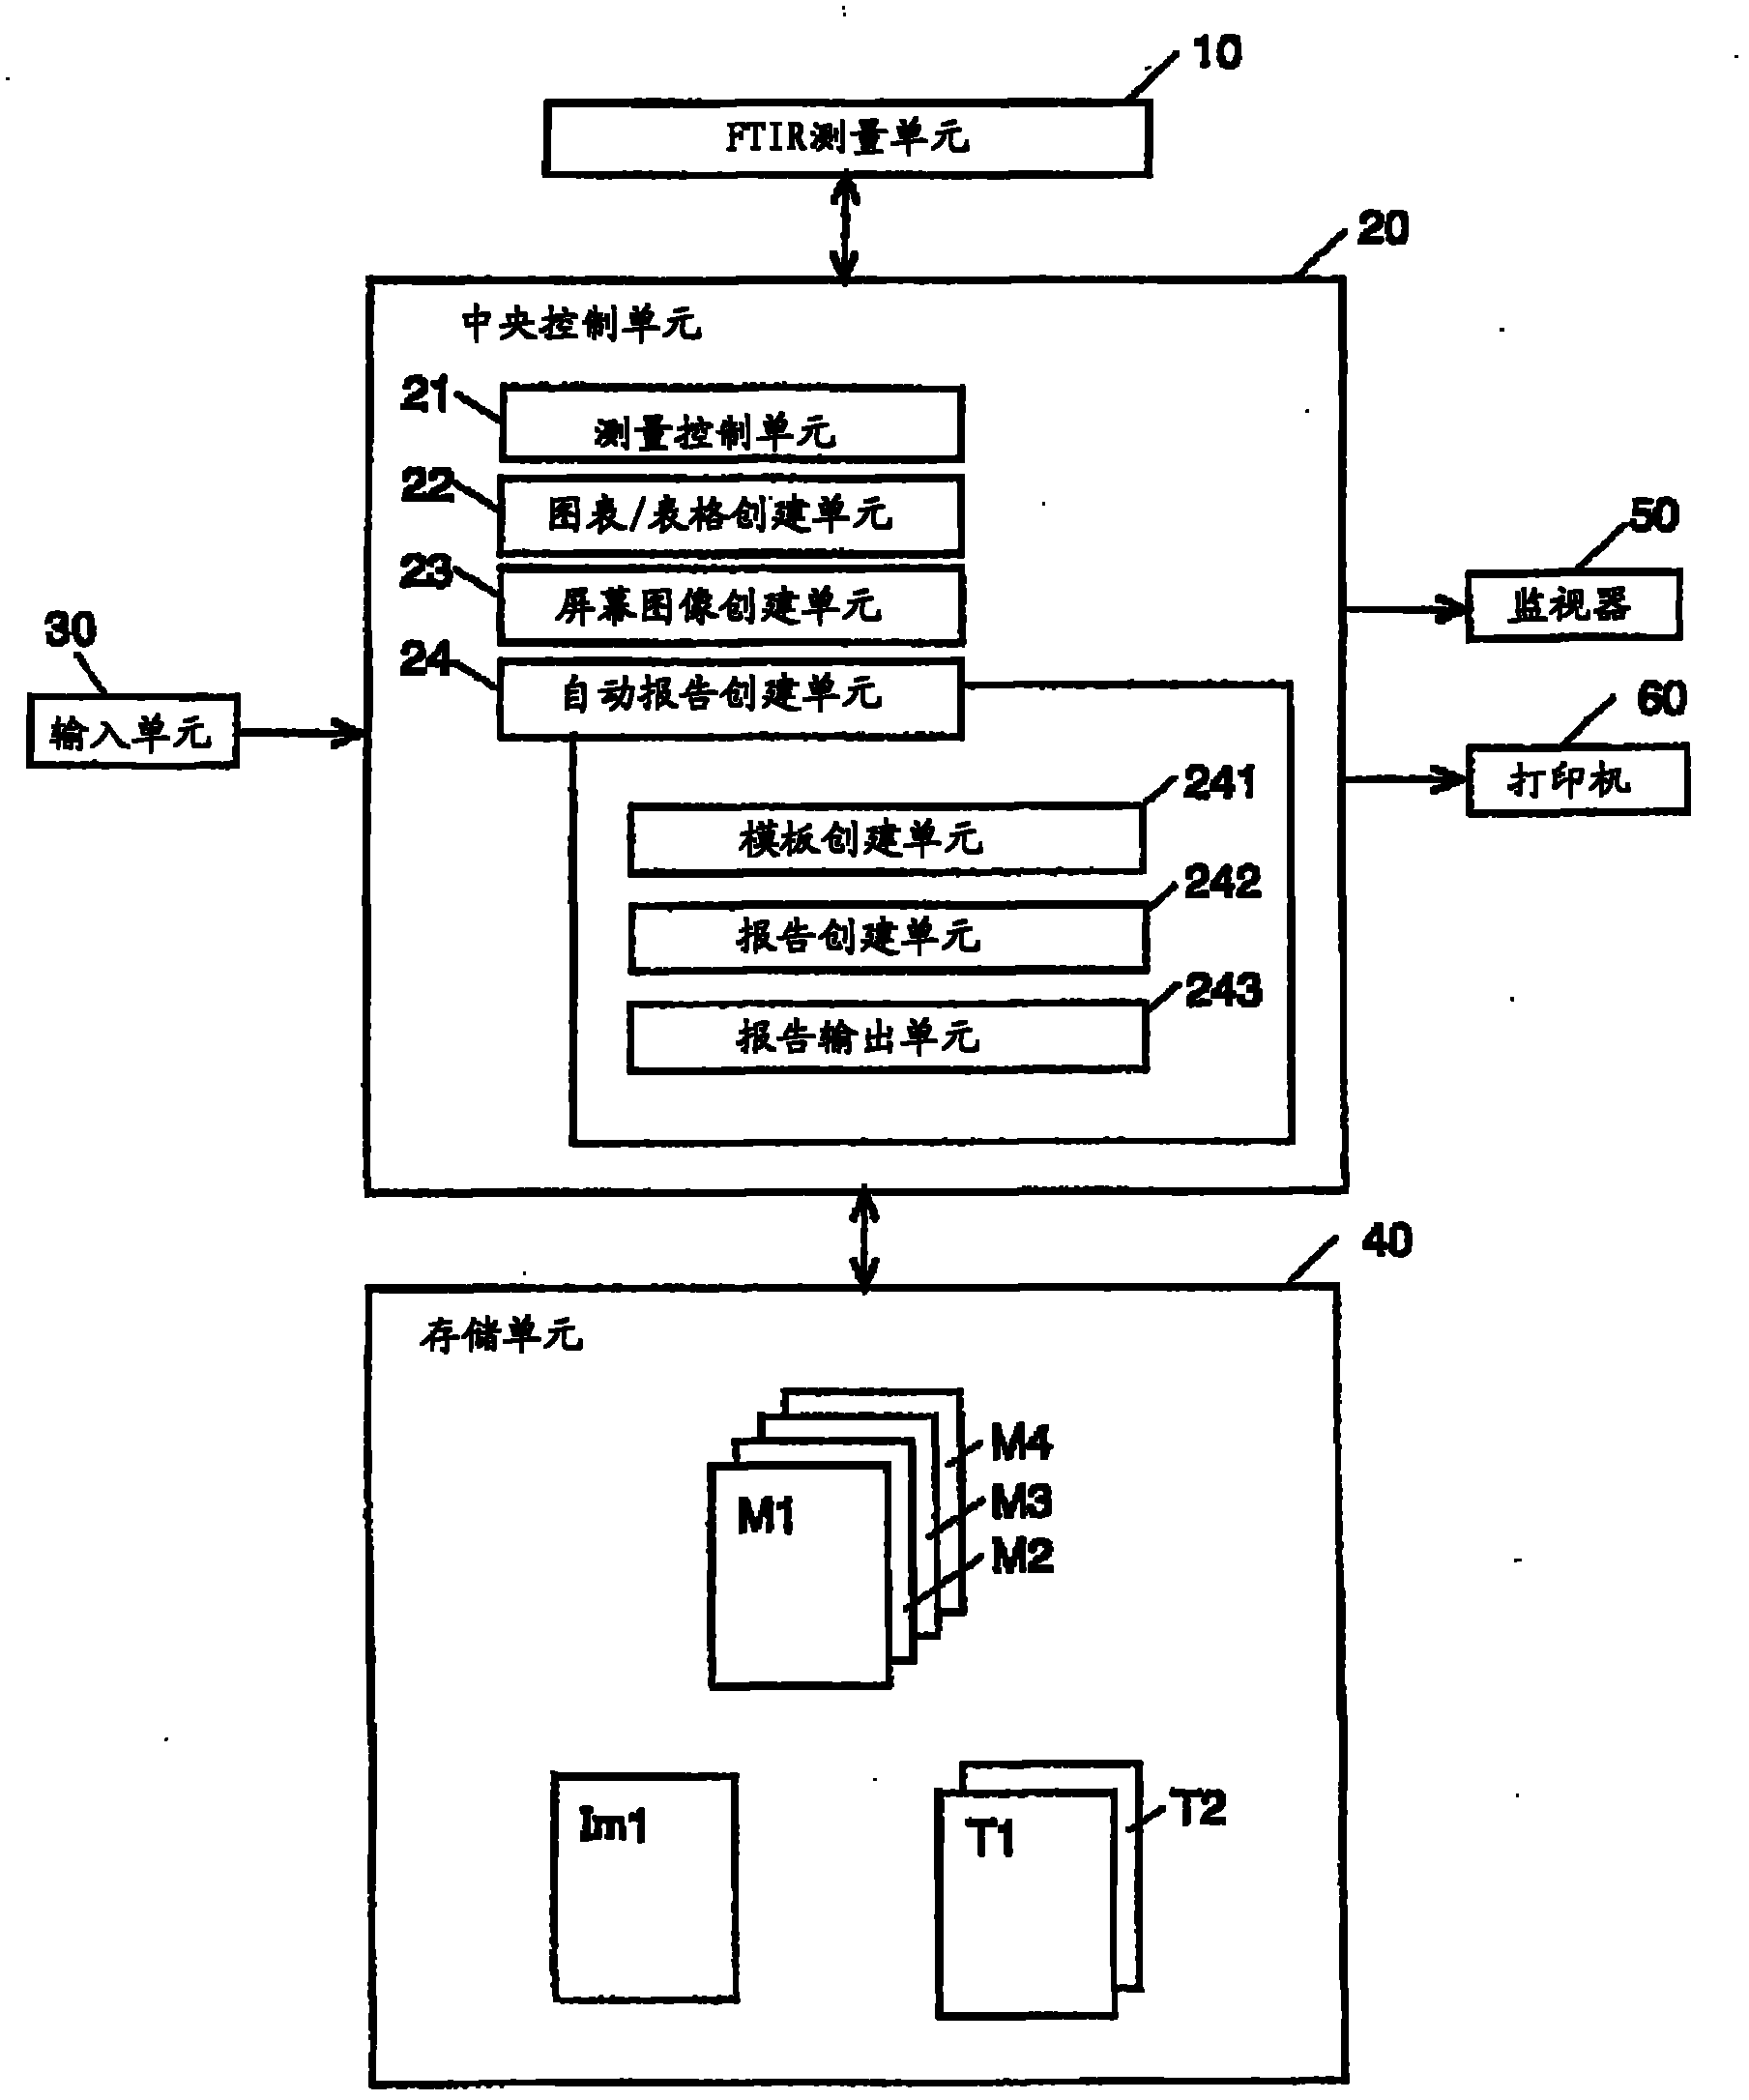 Measurement data analysis processing apparatus and program therefor